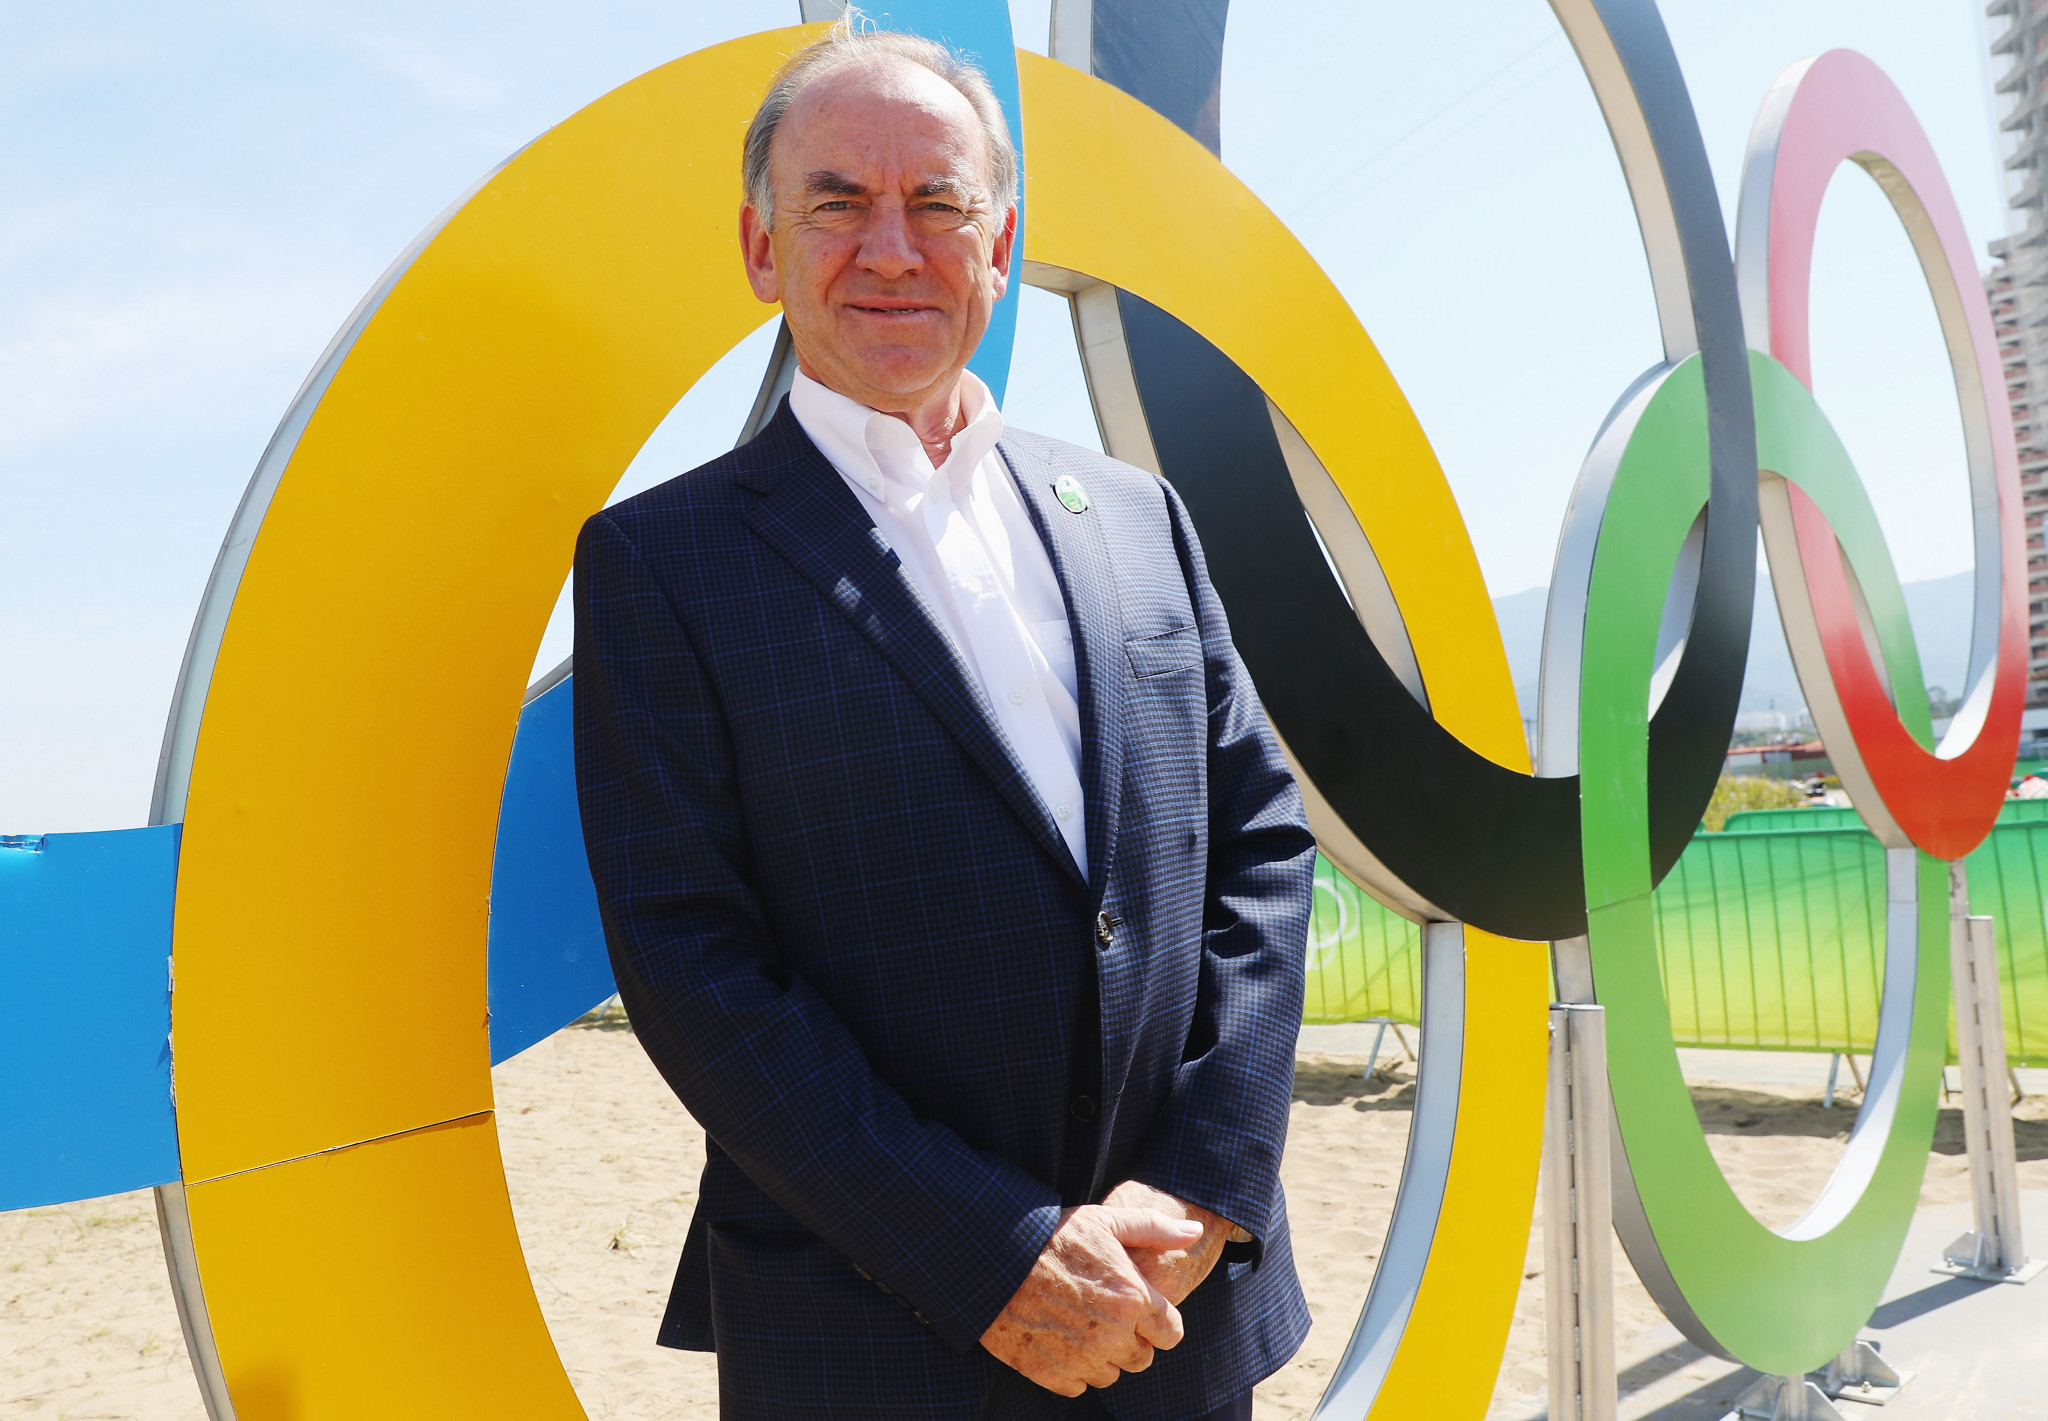 Former IGF President Peter Dawson oversaw golf making a successful Olympic return at the Rio 2016 despite initial fears over player attendance ©Getty Images 